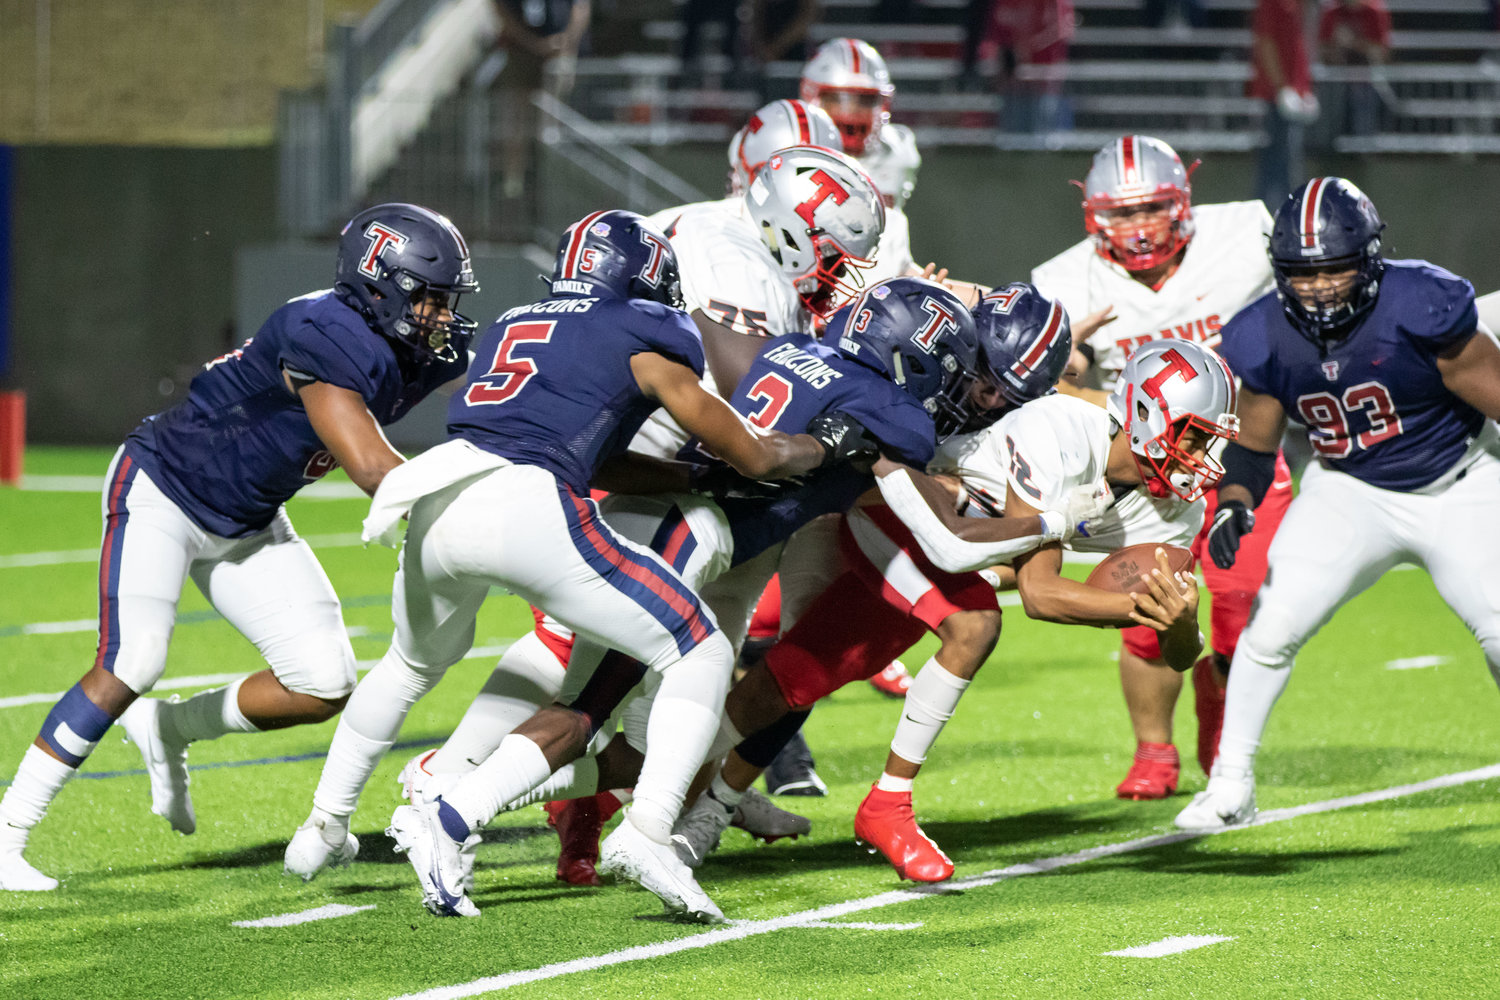 Tompkins defensive players swarm Travis quarterback Anthony Njoku during the Falcons' 42-10 Class 6A Division I bi-district playoff win over Fort Bend Travis on Dec. 11 at Legacy Stadium.